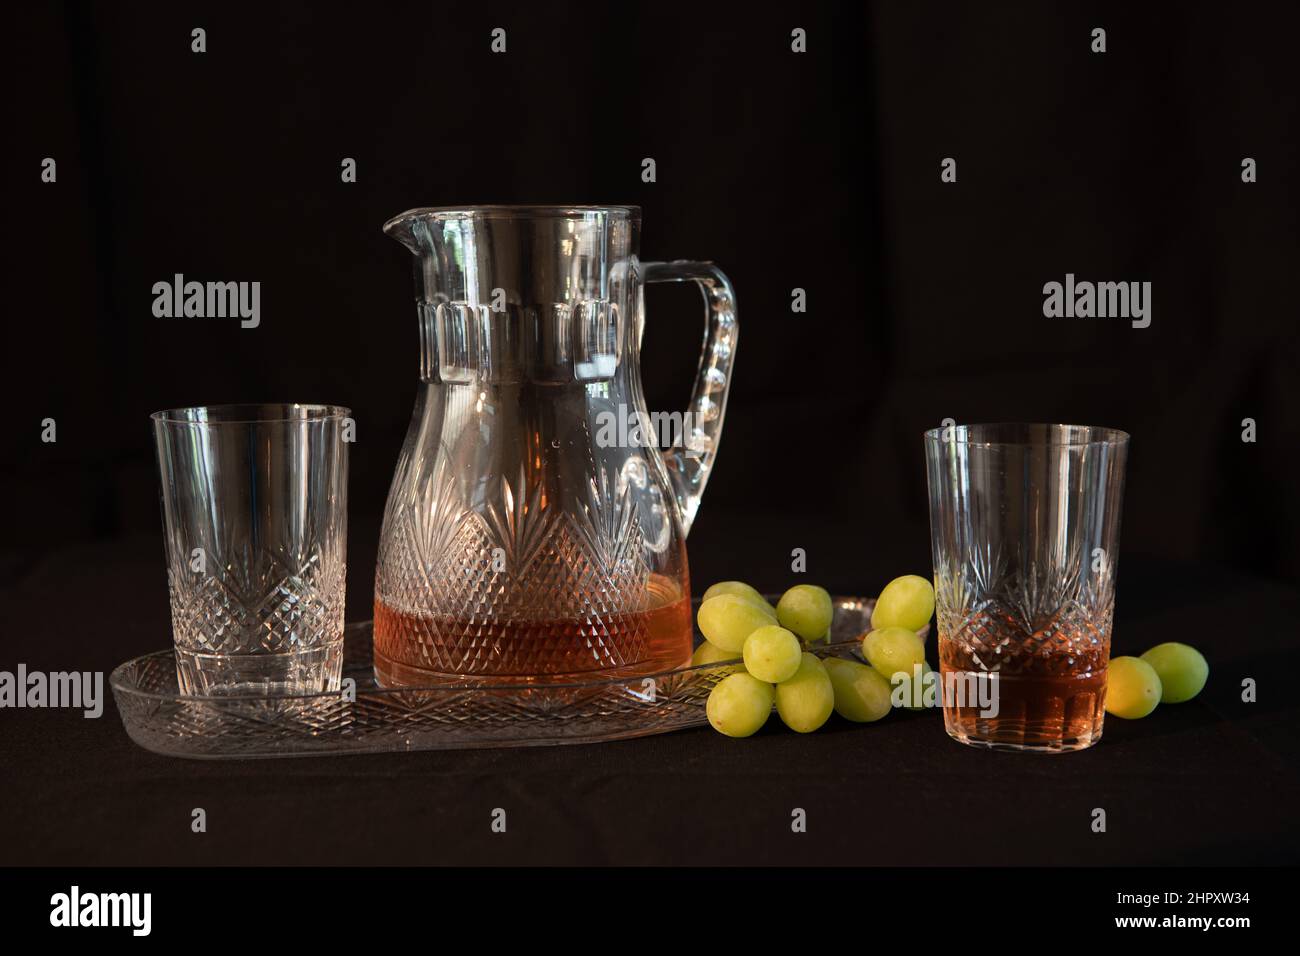 crystal carafe with glasses on a tray, Still life, low key image Stock Photo